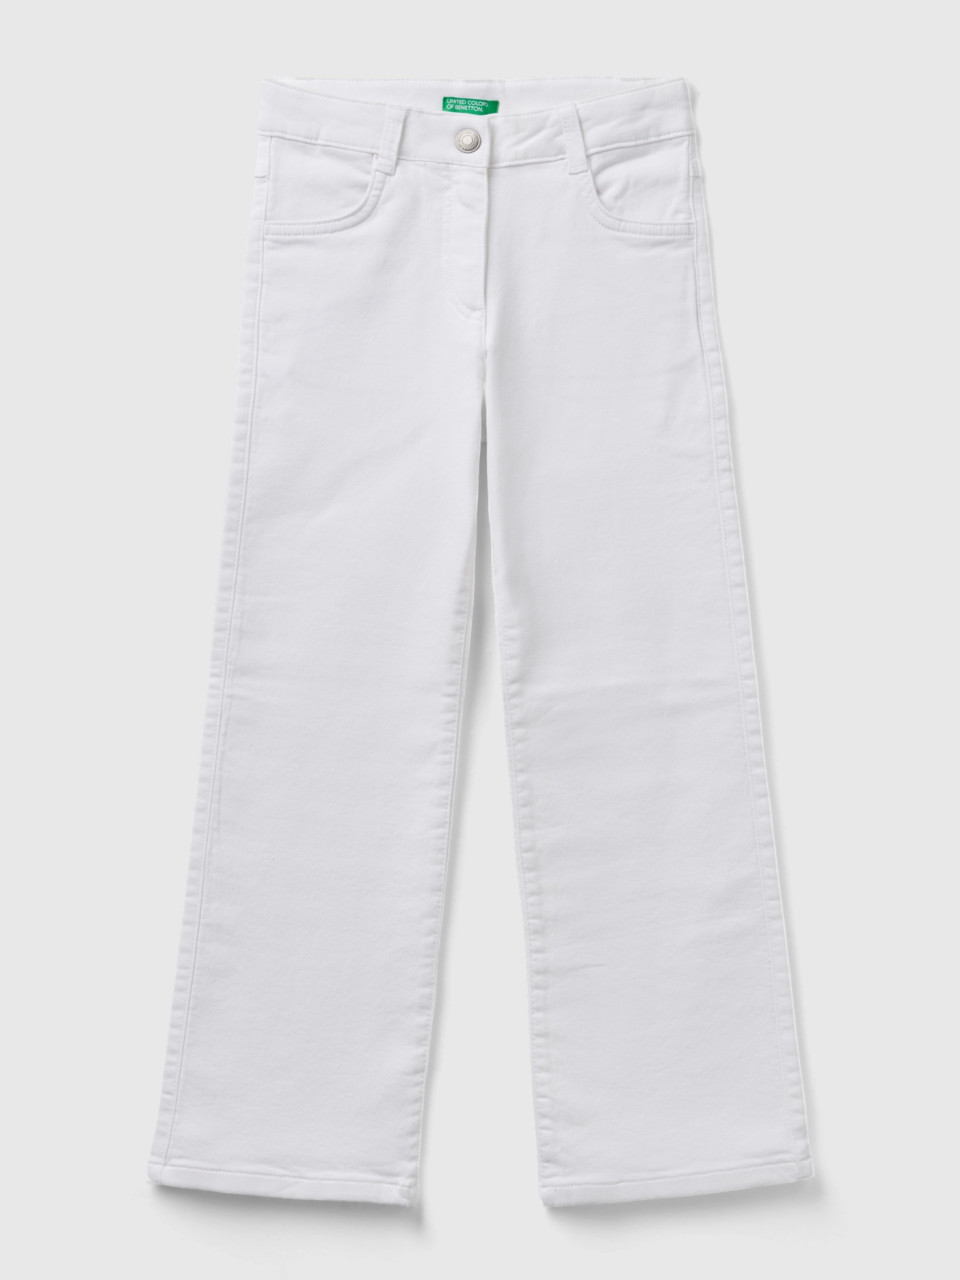 Benetton, Flared Stretch Pants, White, Kids